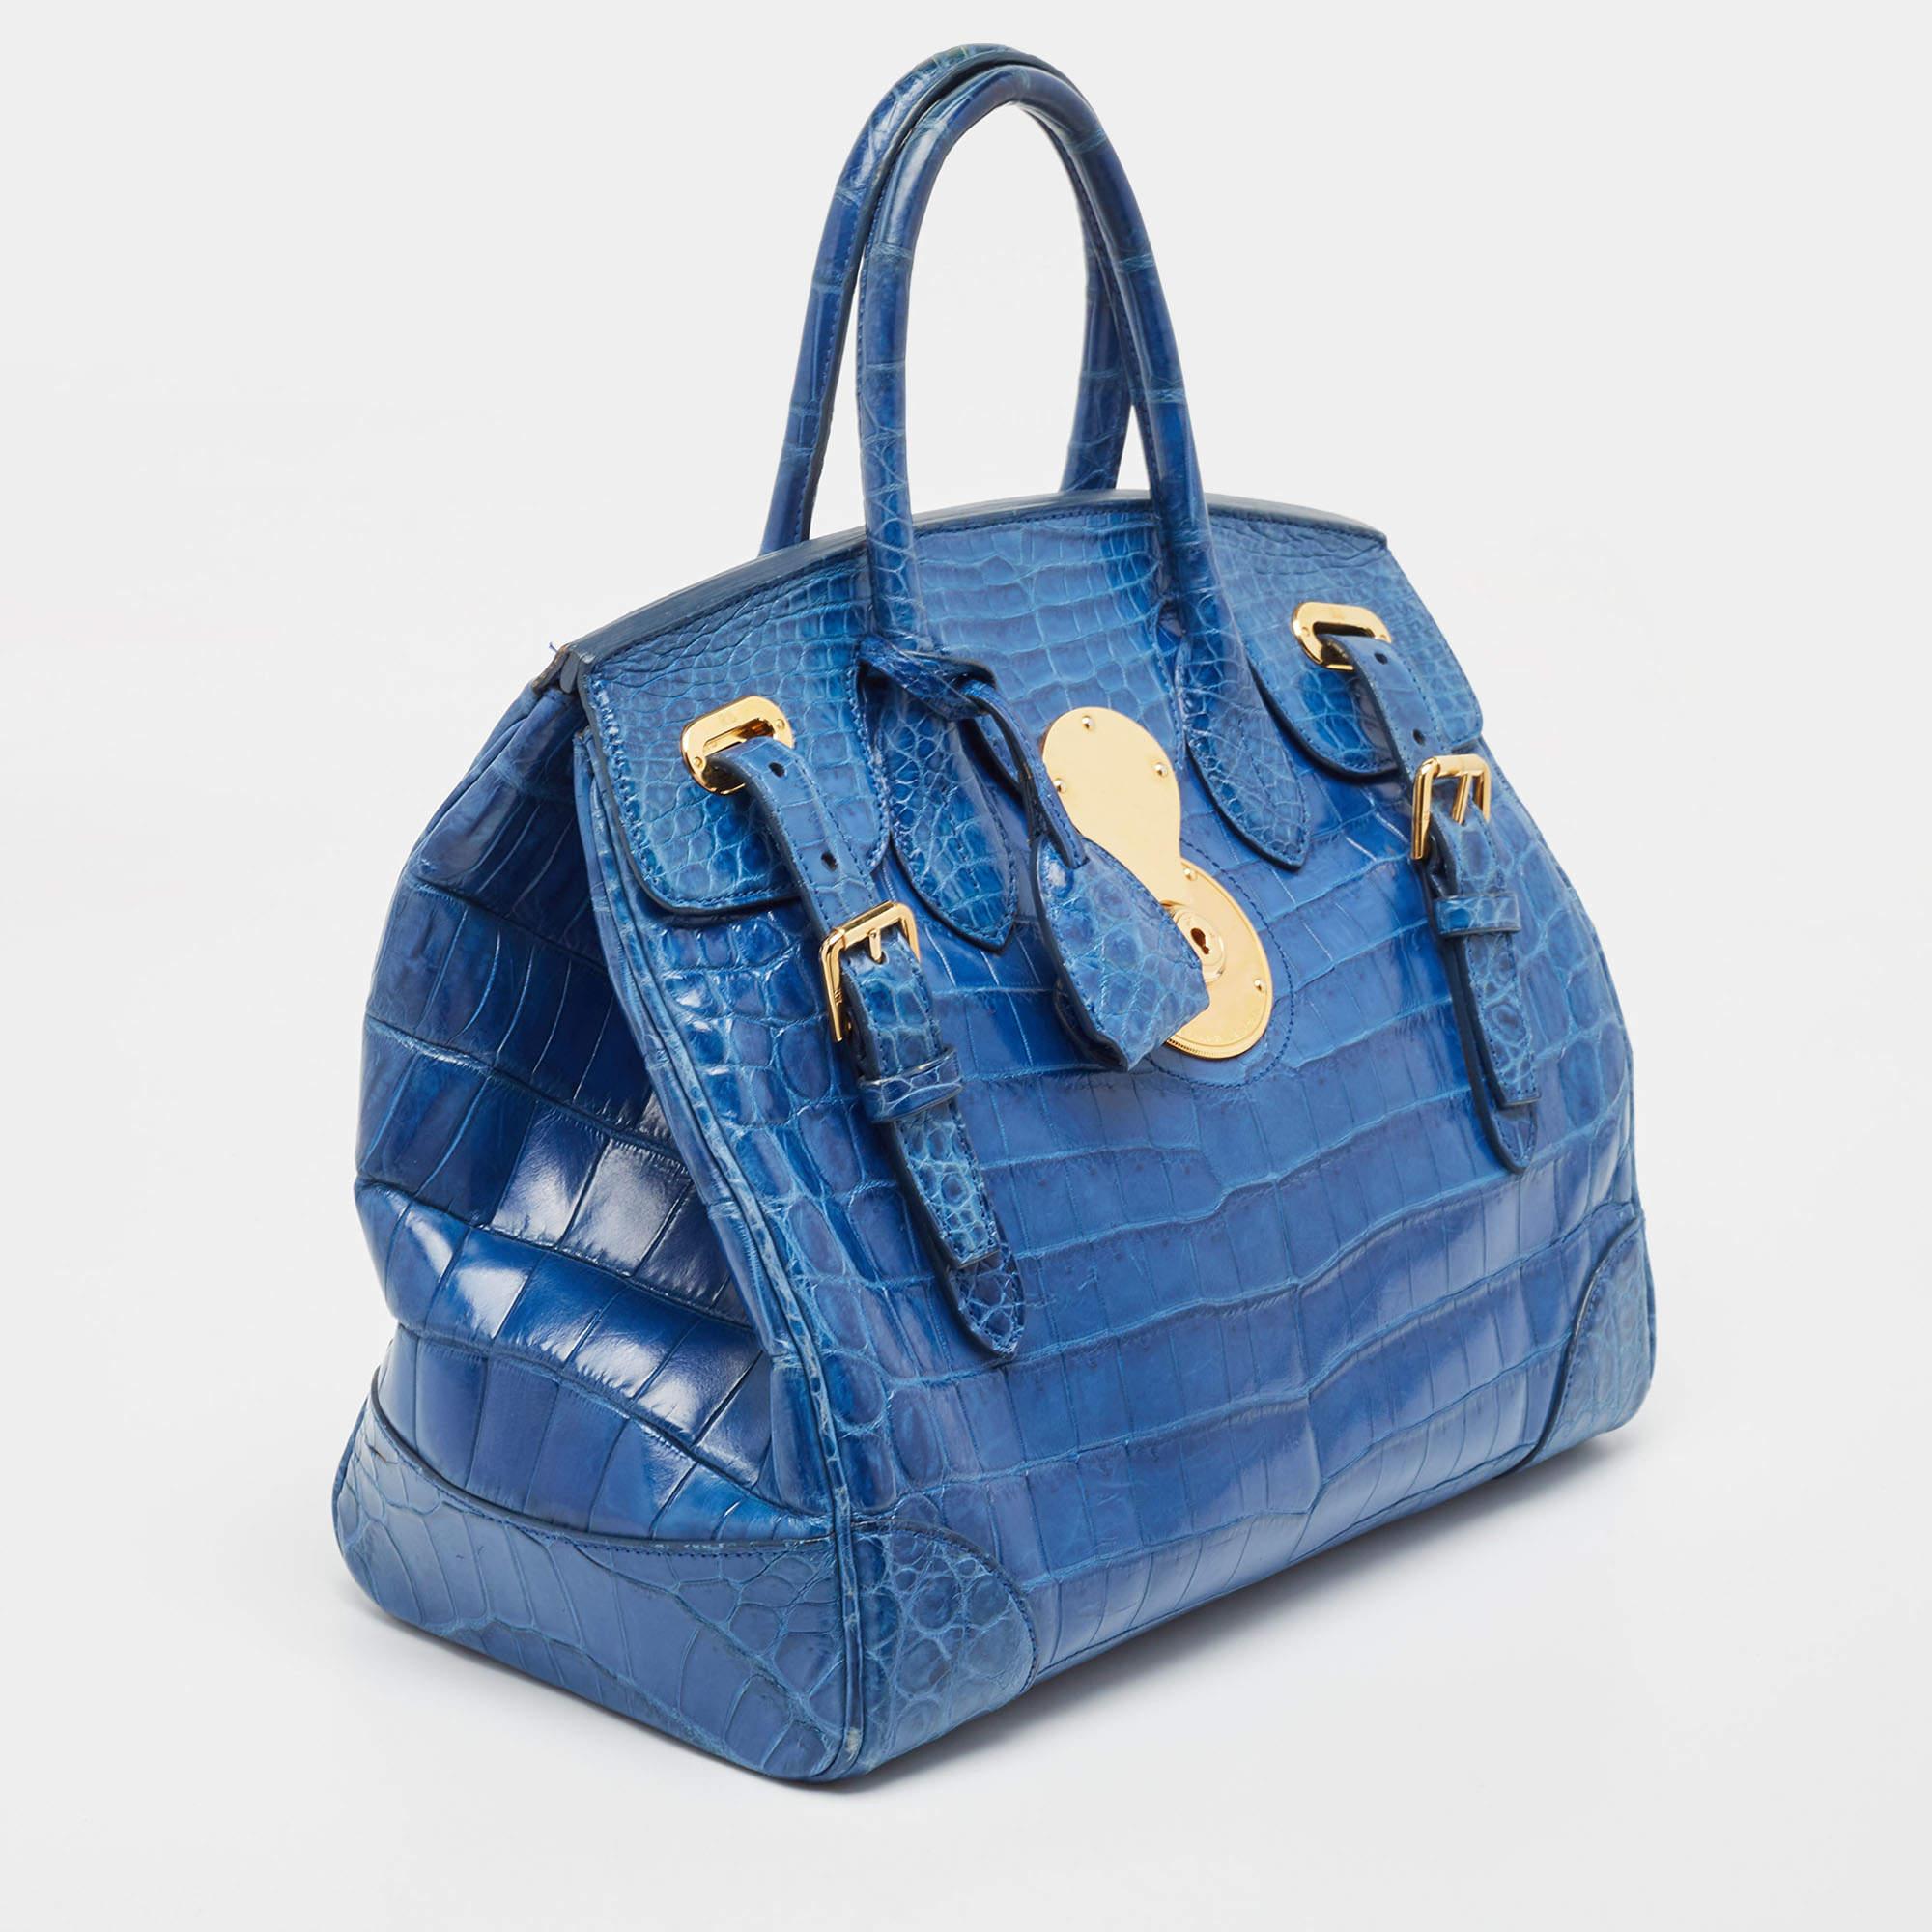 Classy in shape and design, this Ricky 33 tote by Ralph Lauren will be a loved addition to your closet. It has been crafted from crocodile leather and styled minimally with gold-tone hardware. It comes with two top handles and a leather-lined